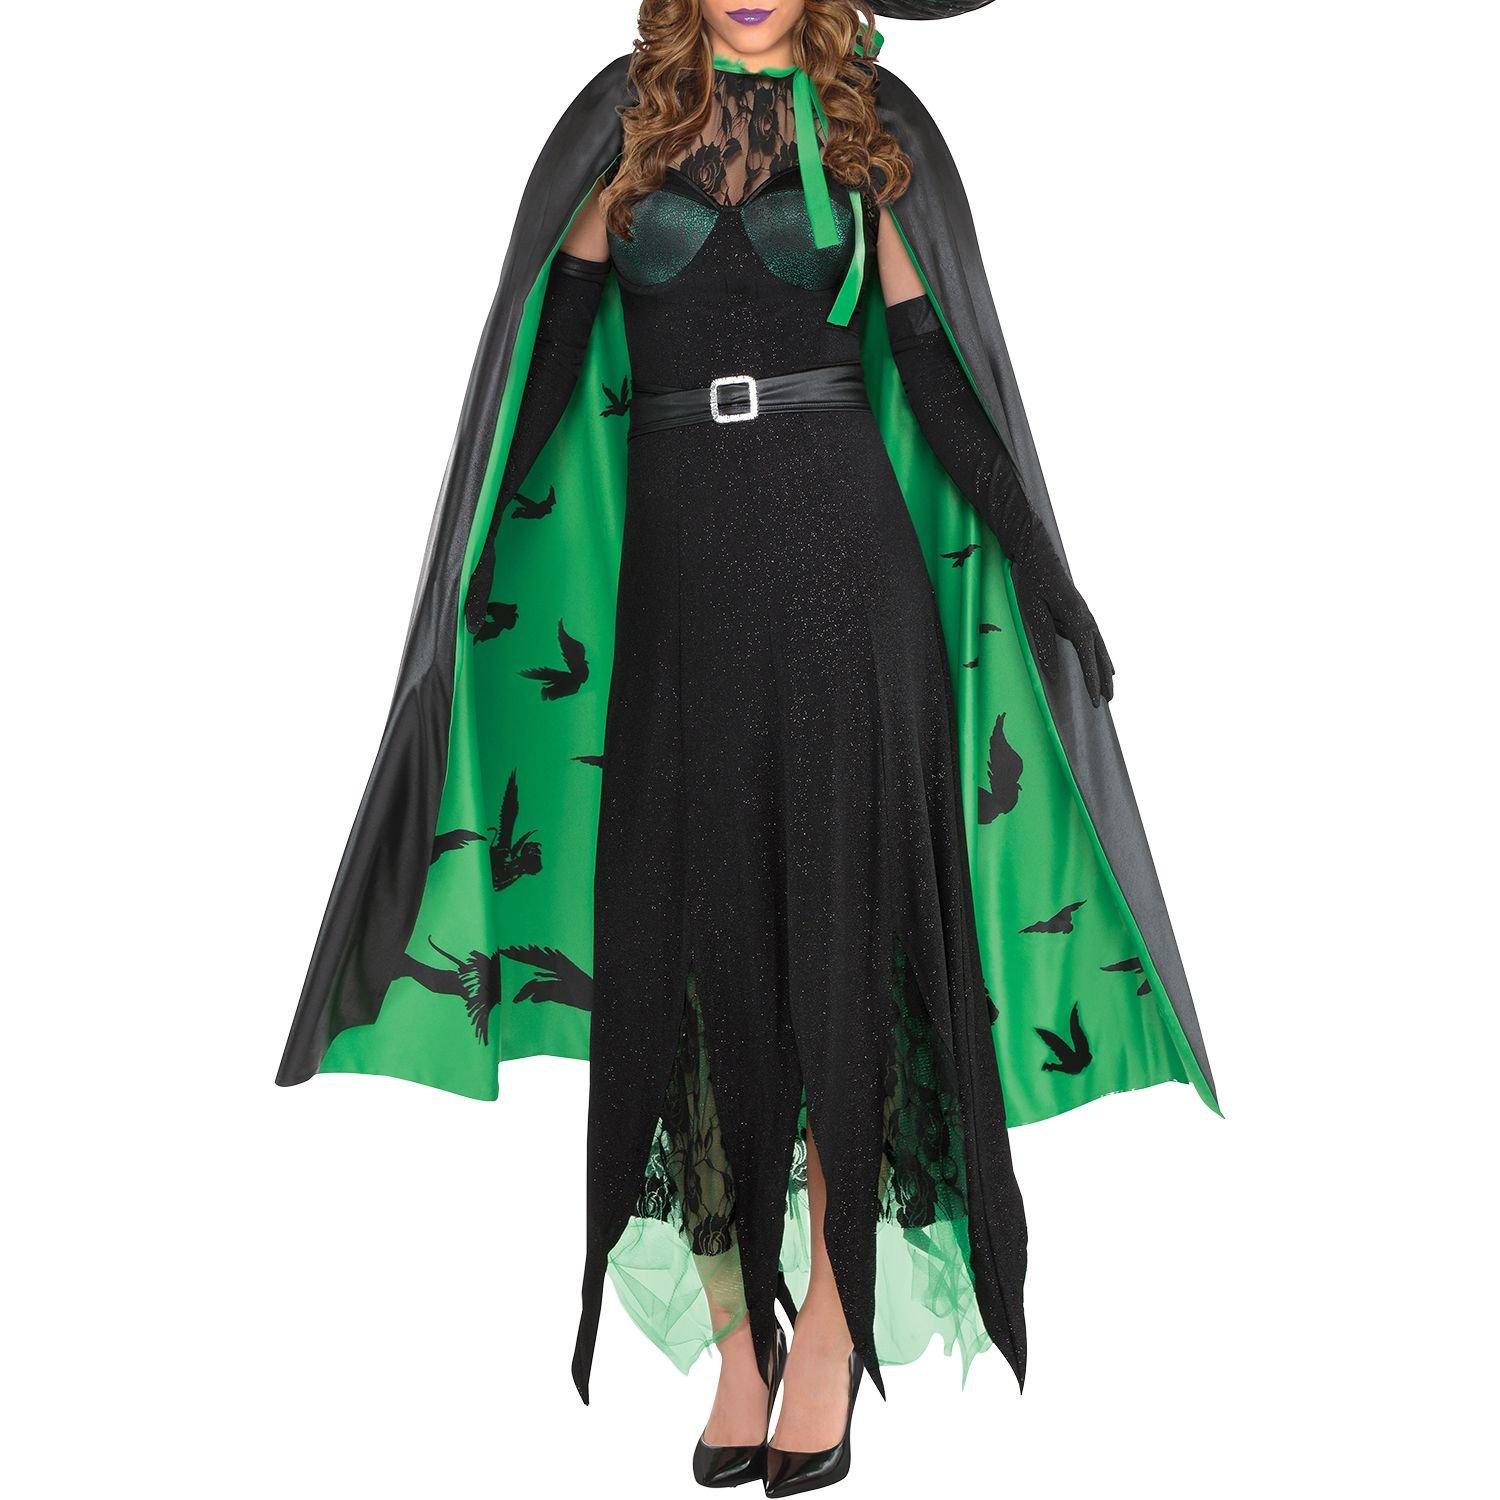 Womens Wicked Witch Costume - The Wizard of Oz